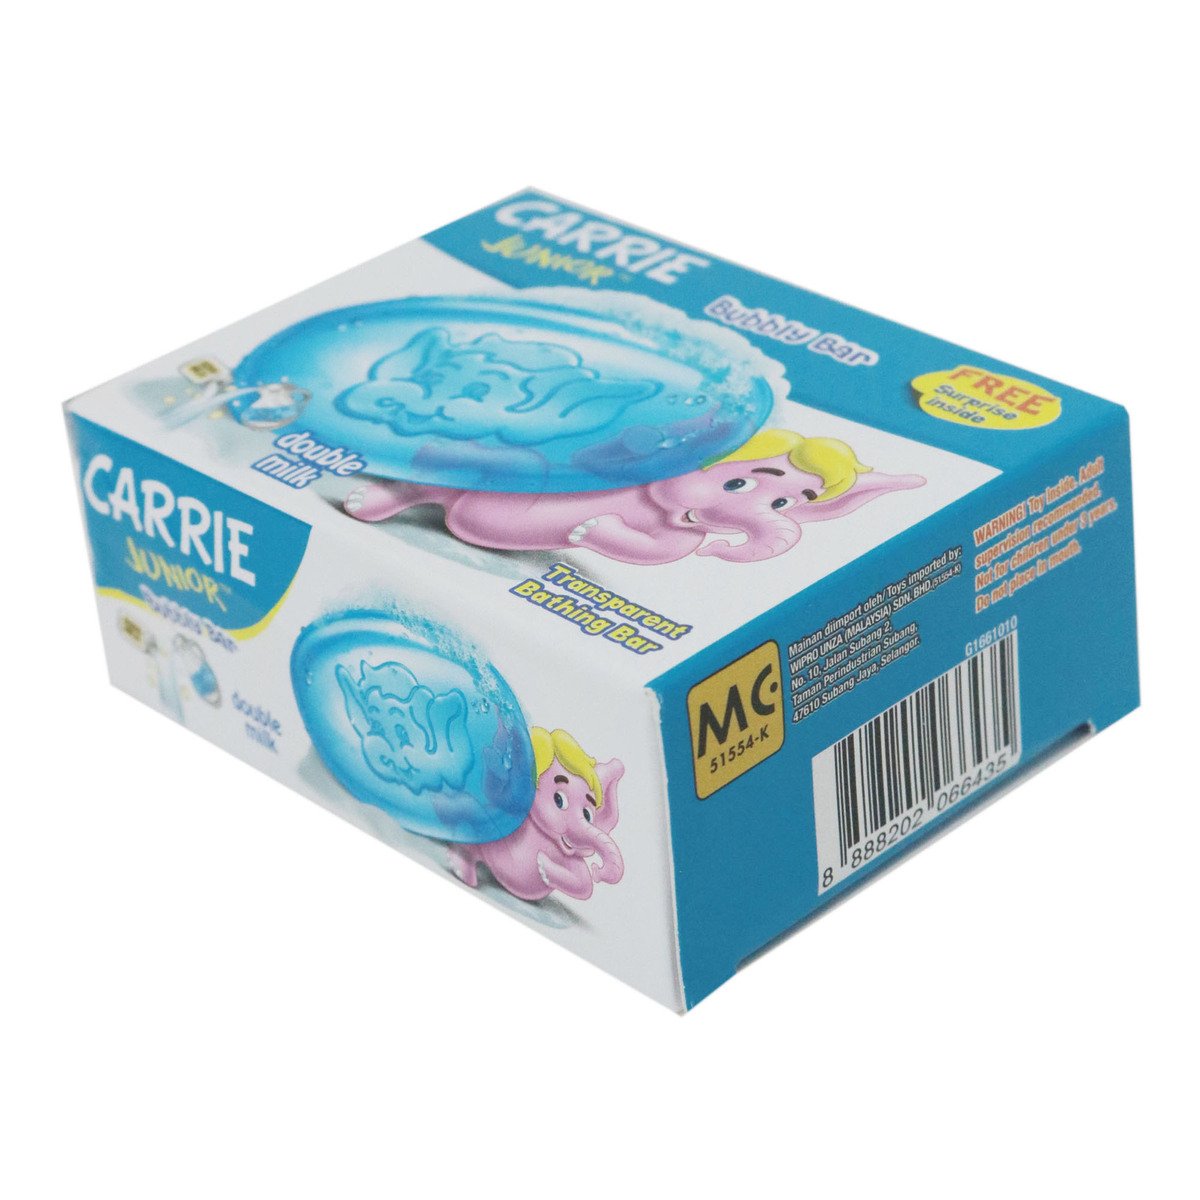 Carrie Junior Bubbly Double Milk Baby Soap 100g